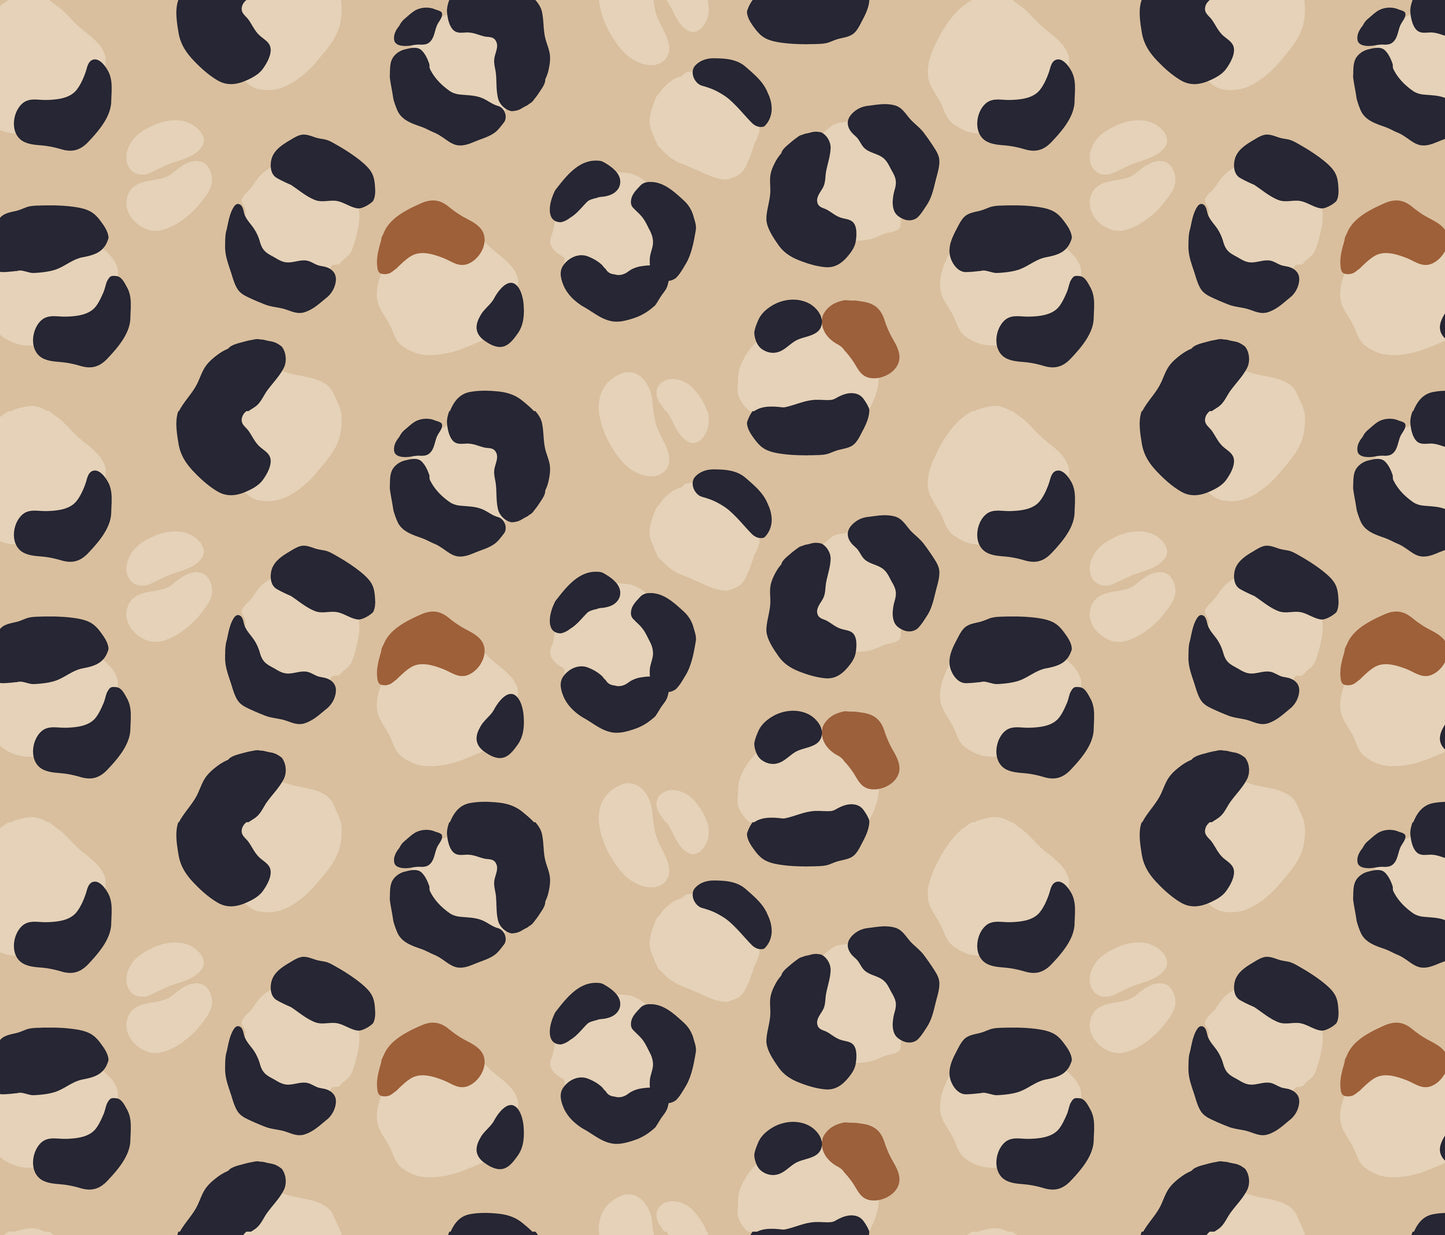 up close of the leopard print wallpaper pattern